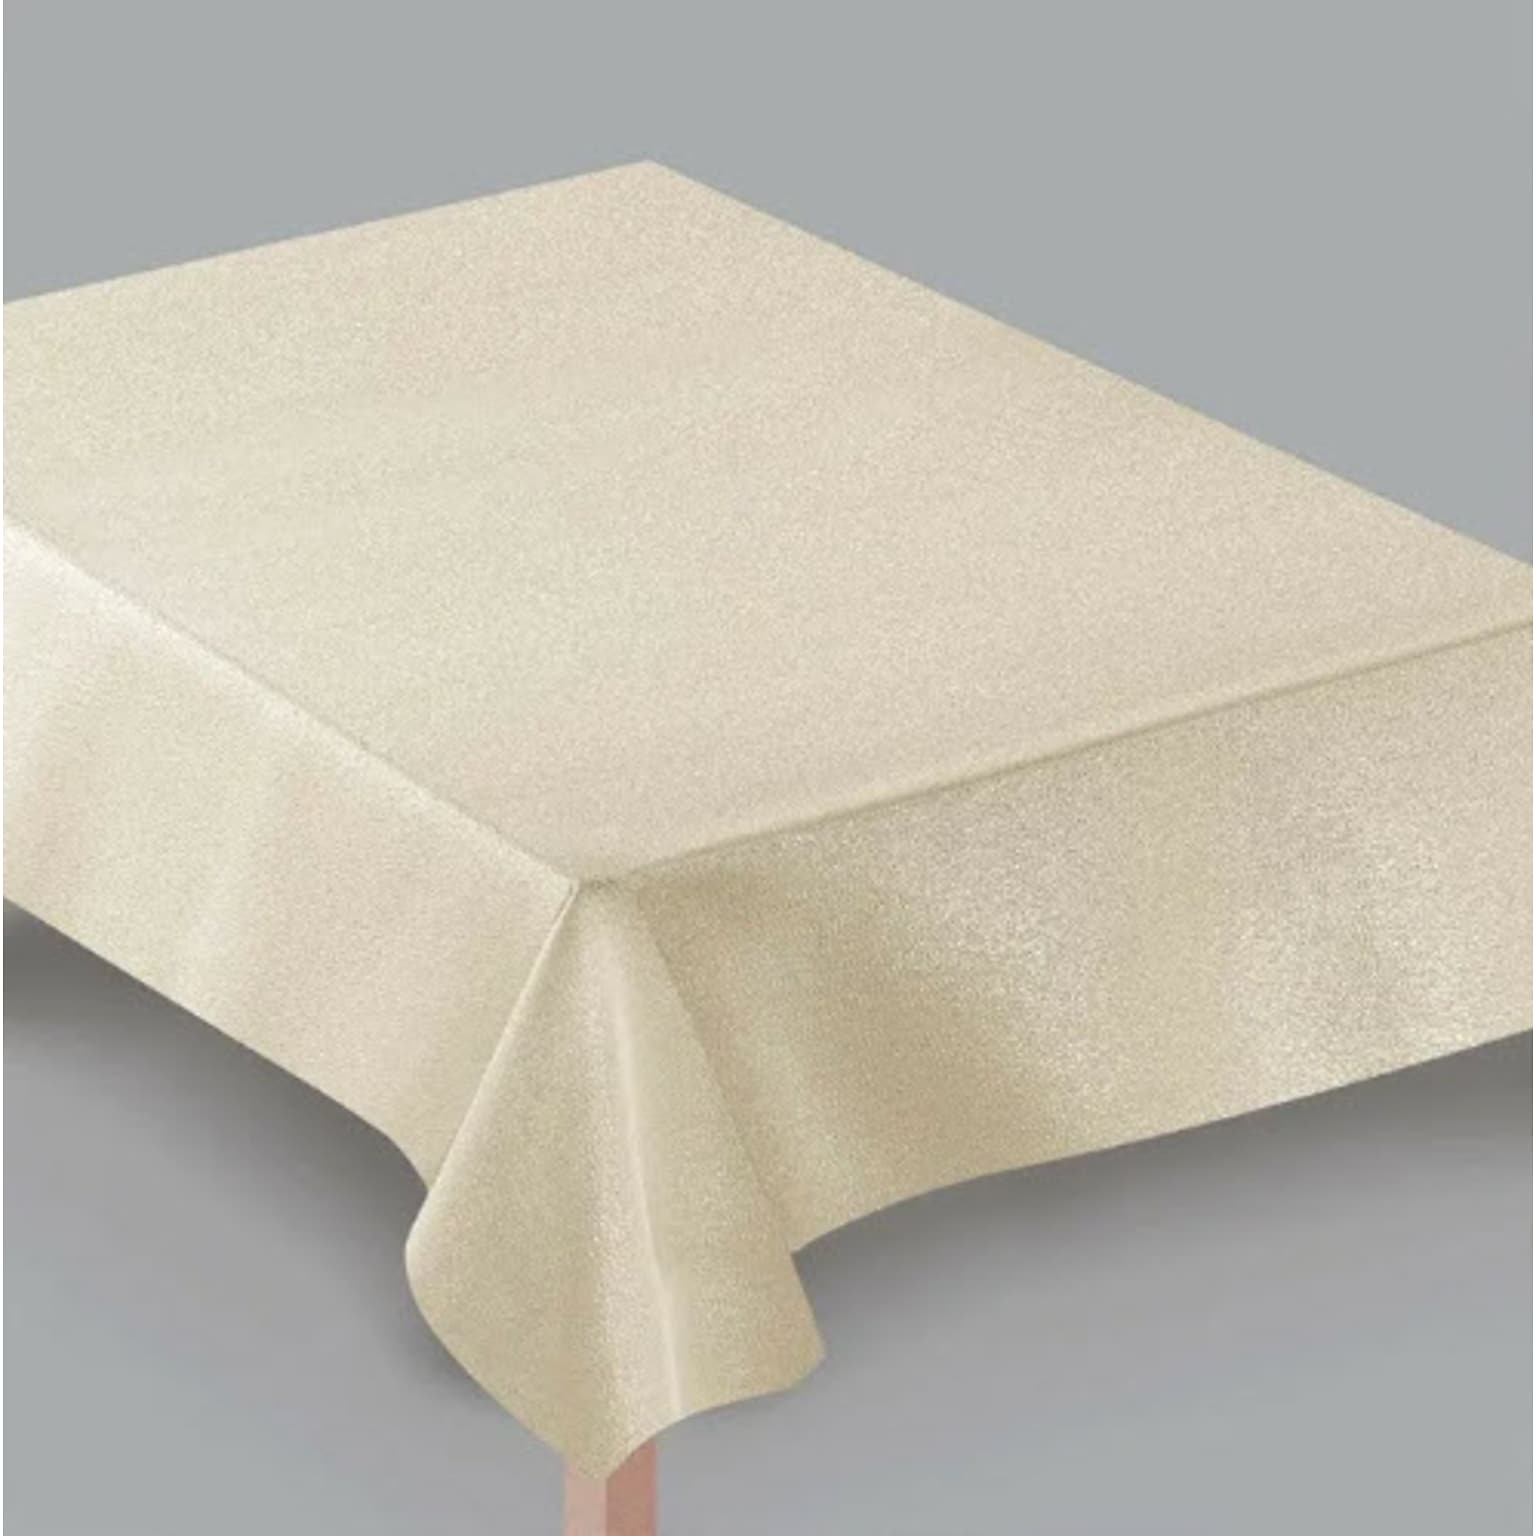 JAM PAPER Premium Shimmer Fabric Tablecloth, Rectangle 60 x 84 inch, Metallic Golden Ivory , 1 Reusable Table Cover/Pack